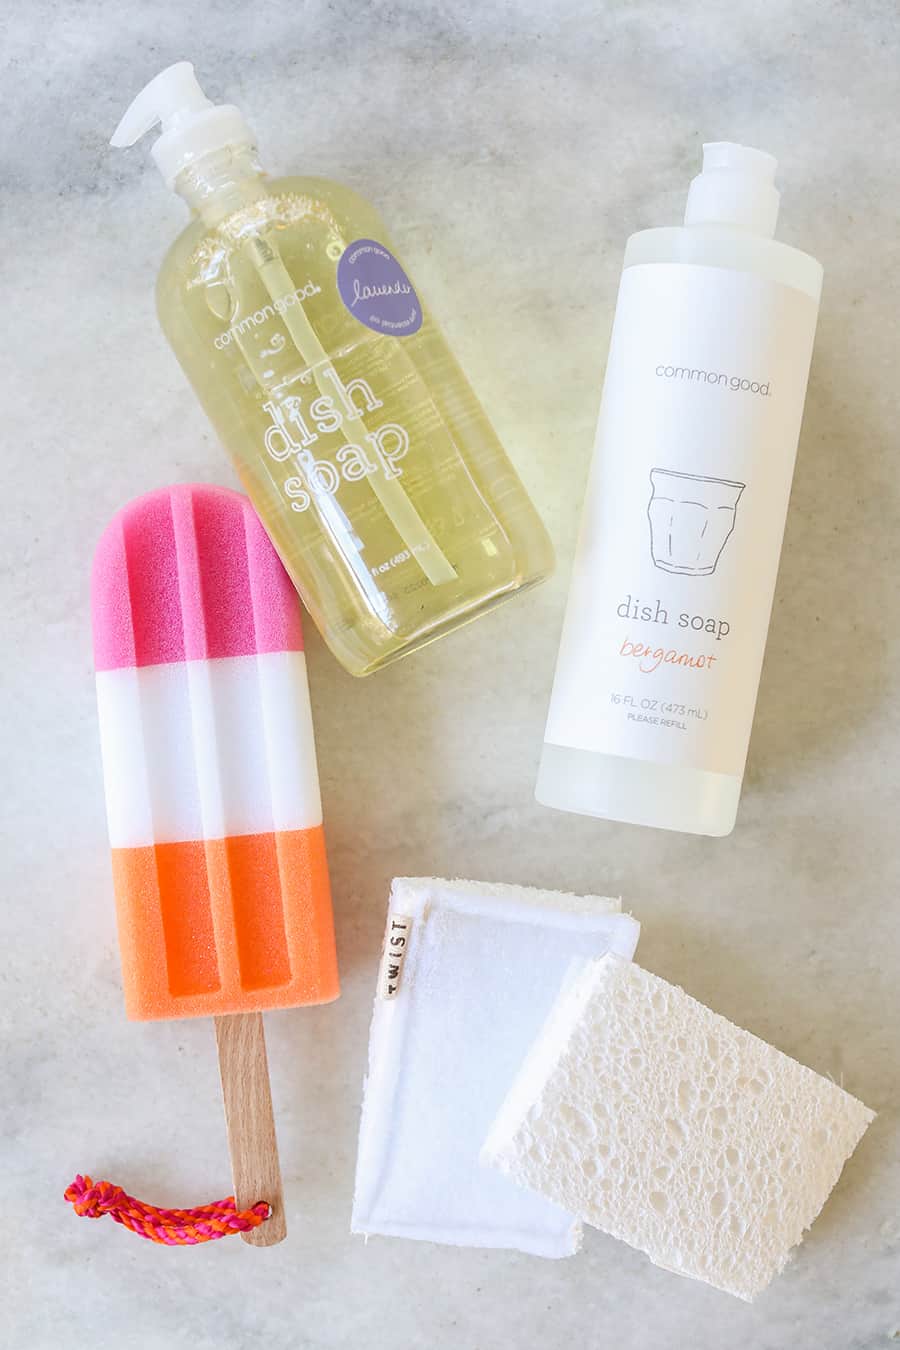 Charming natural cleaning products and a popsicle sponge